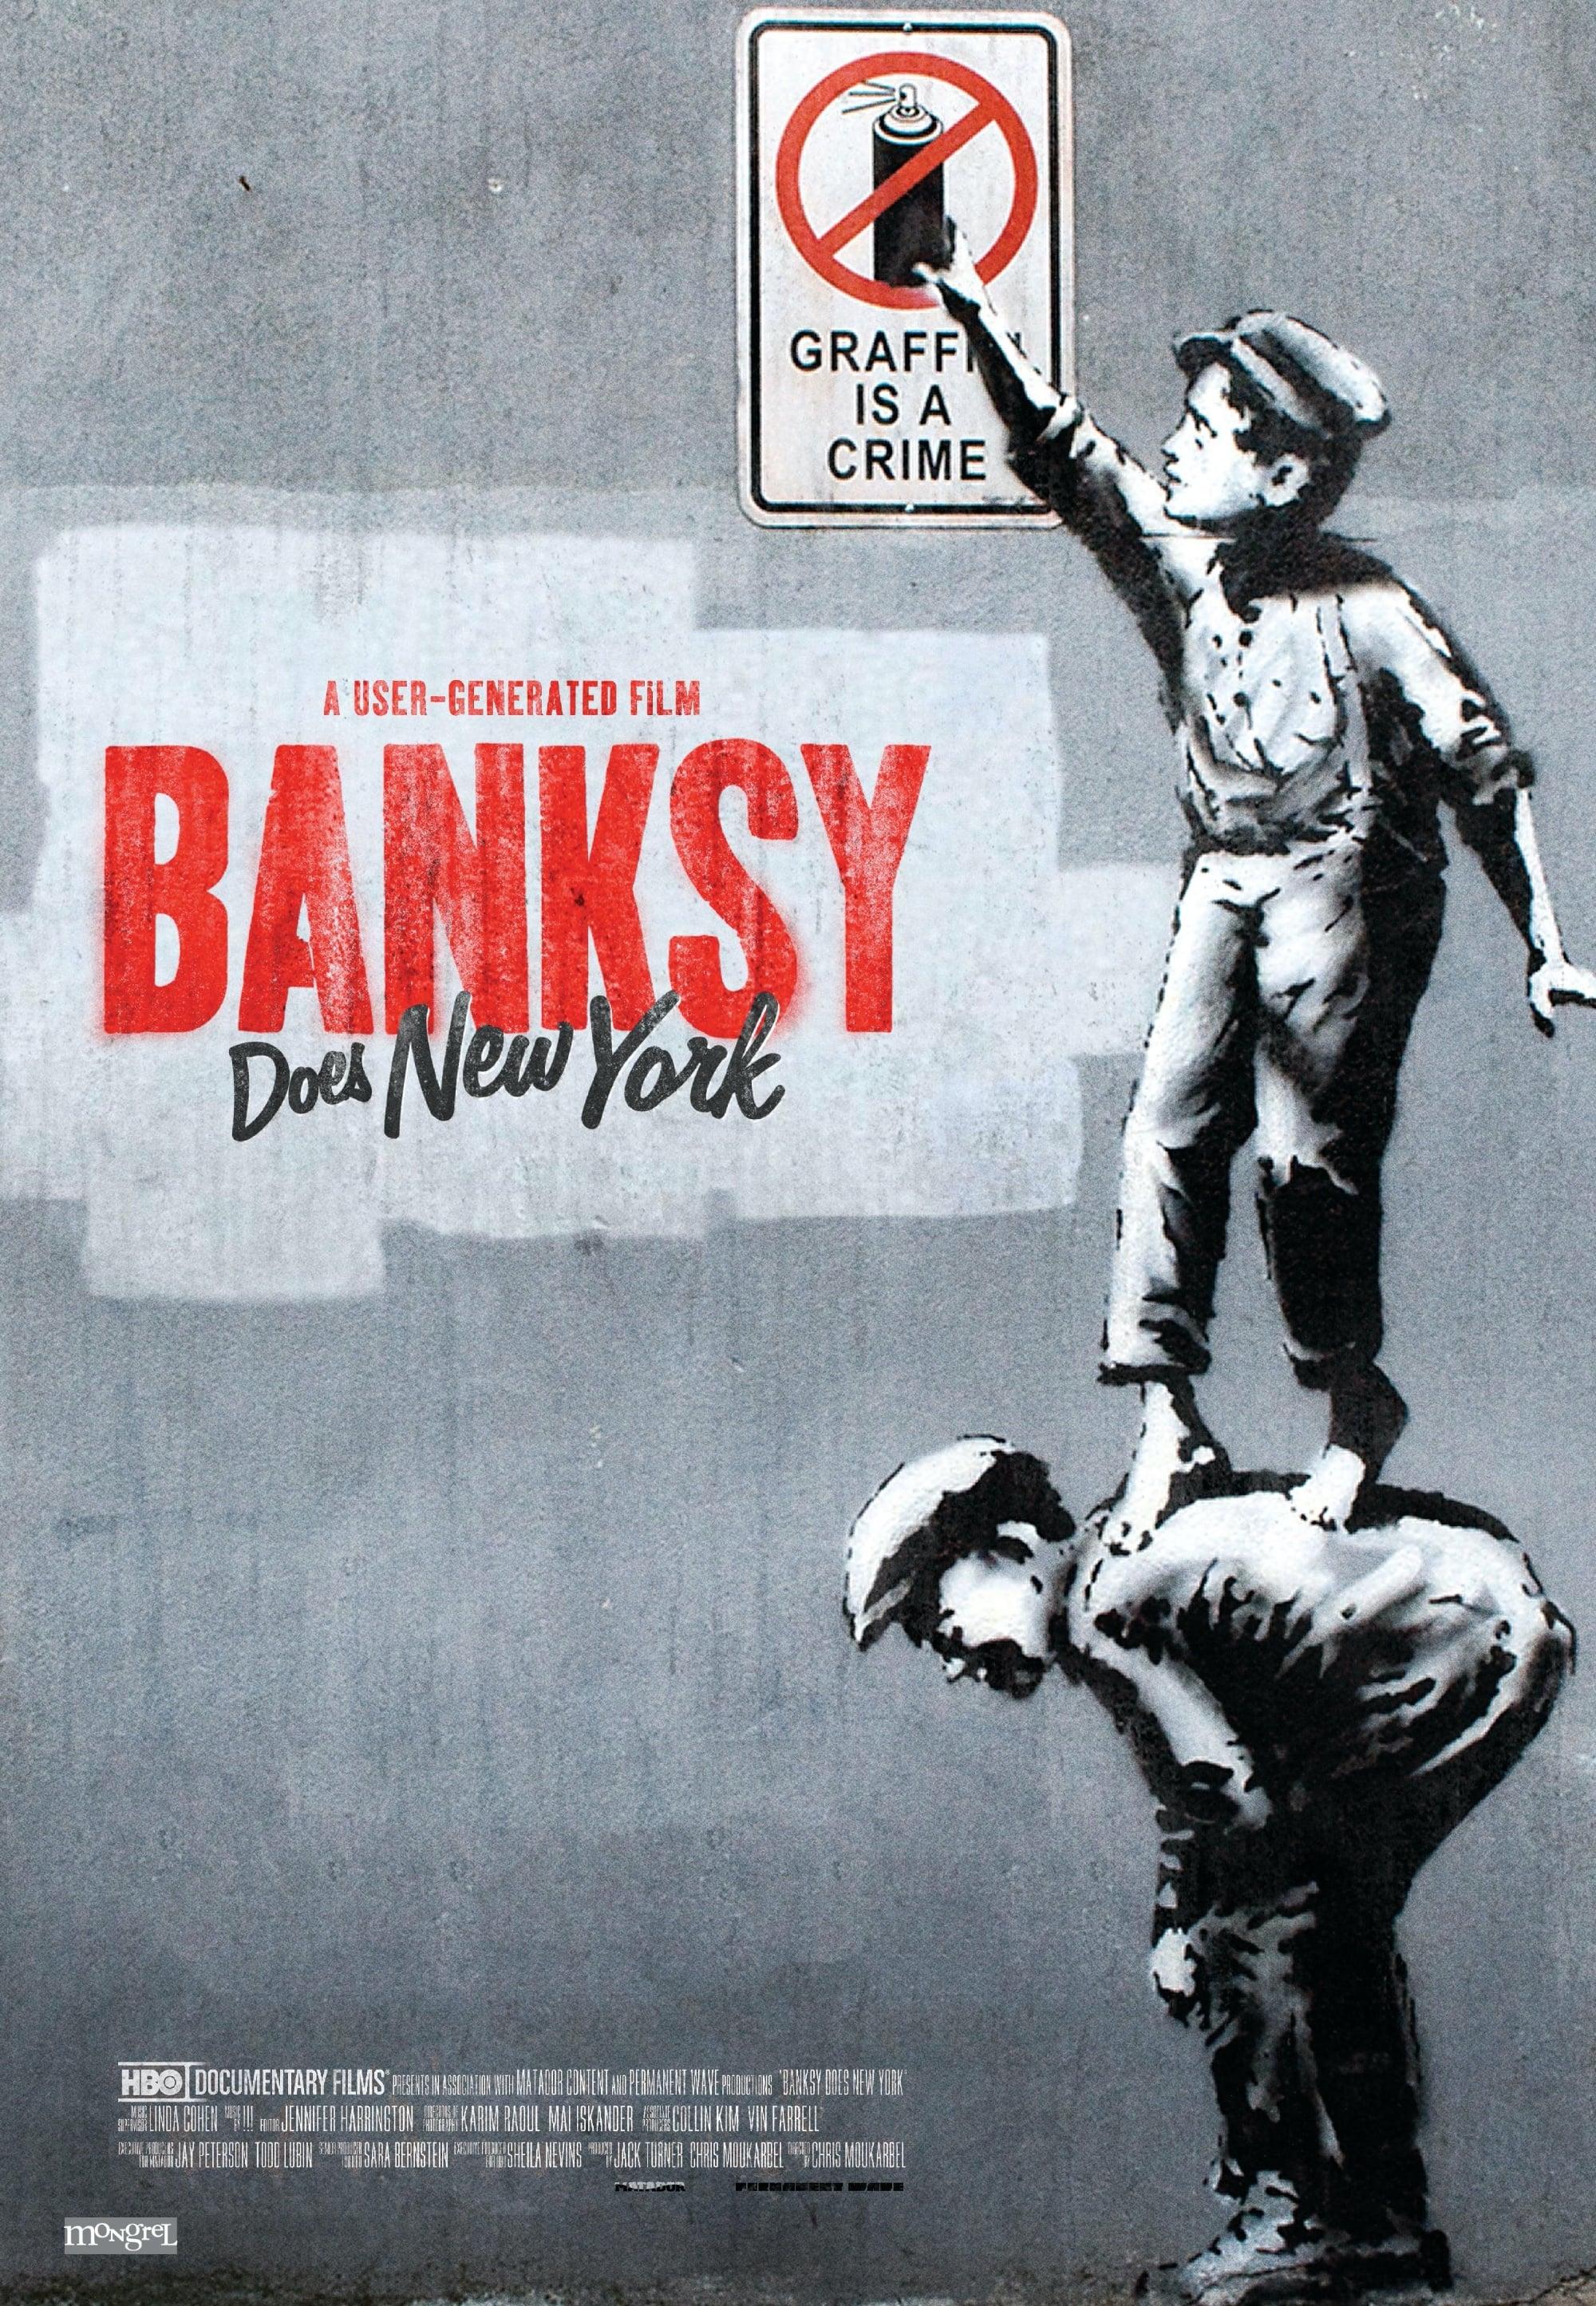 Banksy Does New York poster